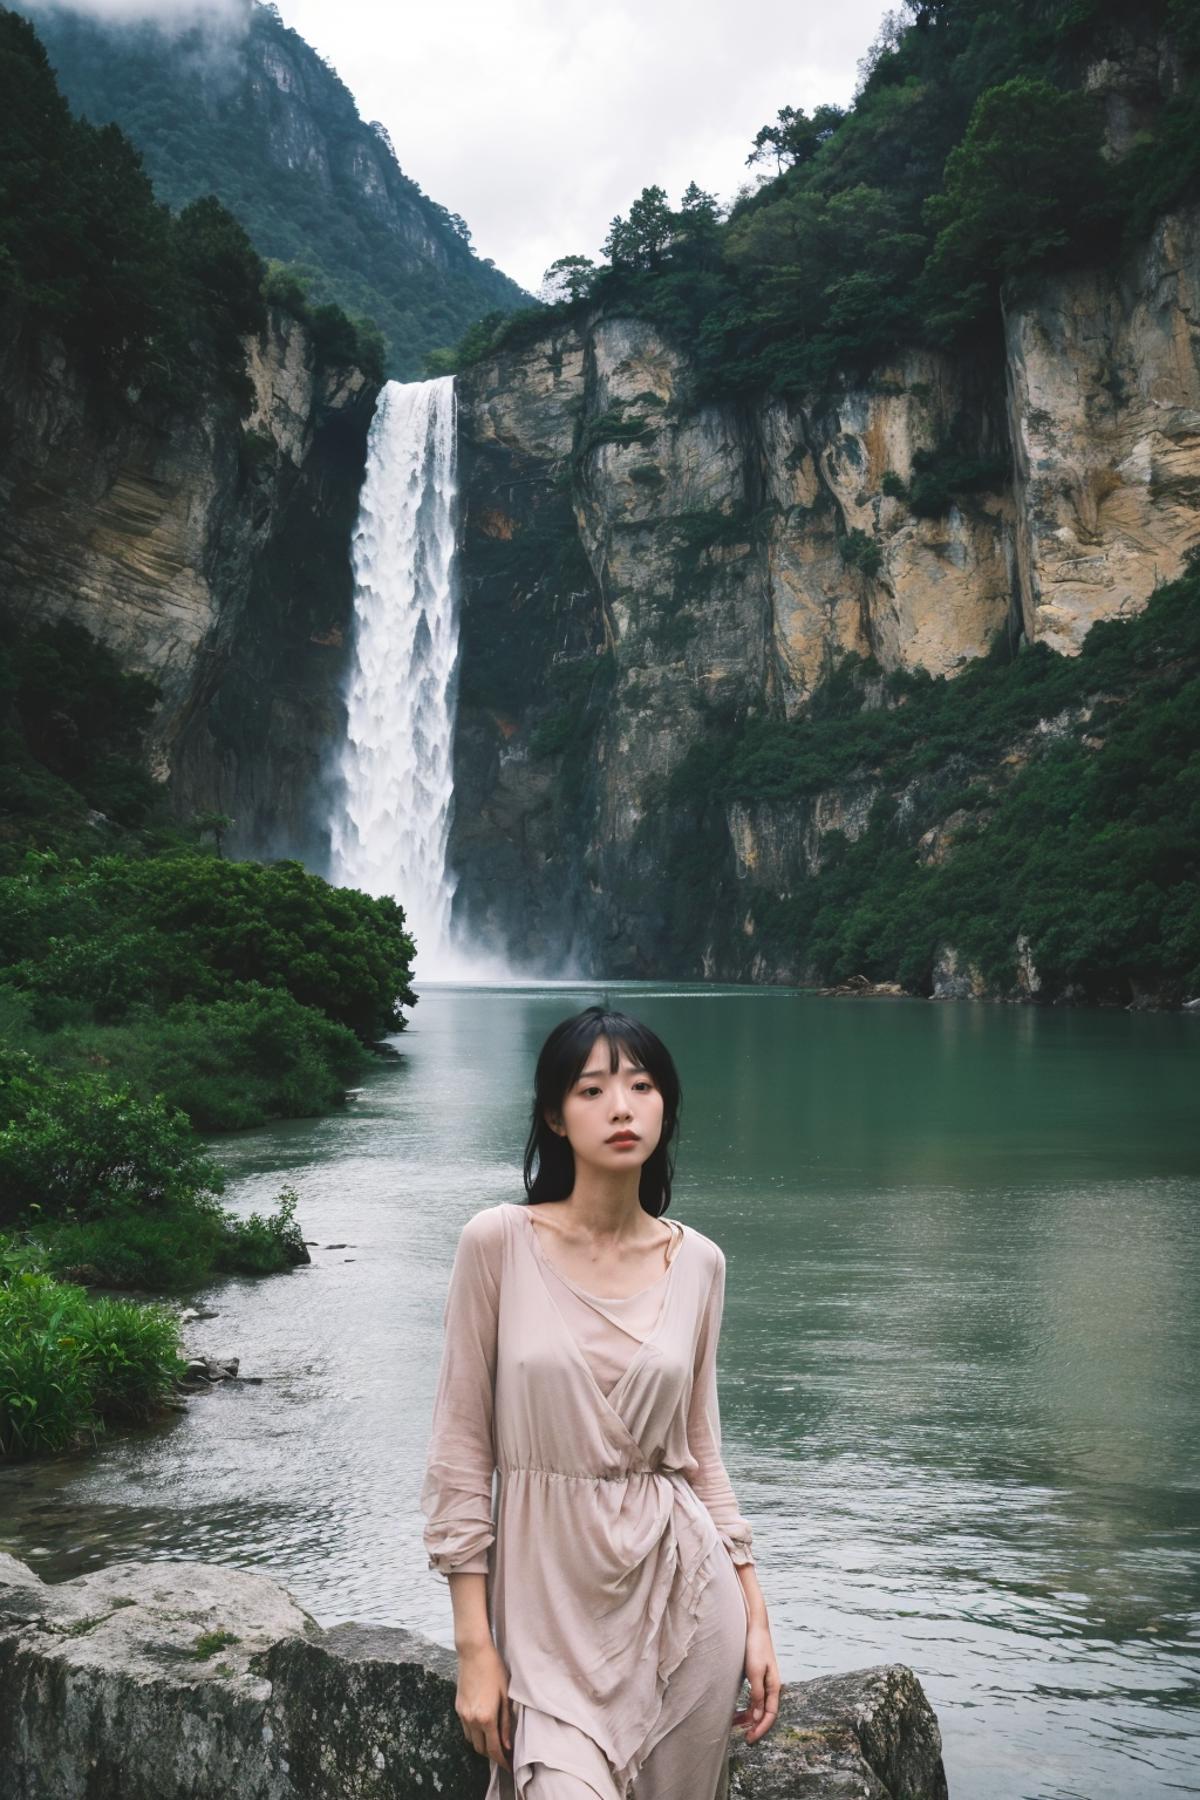 Woman standing in front of a large waterfall and river.